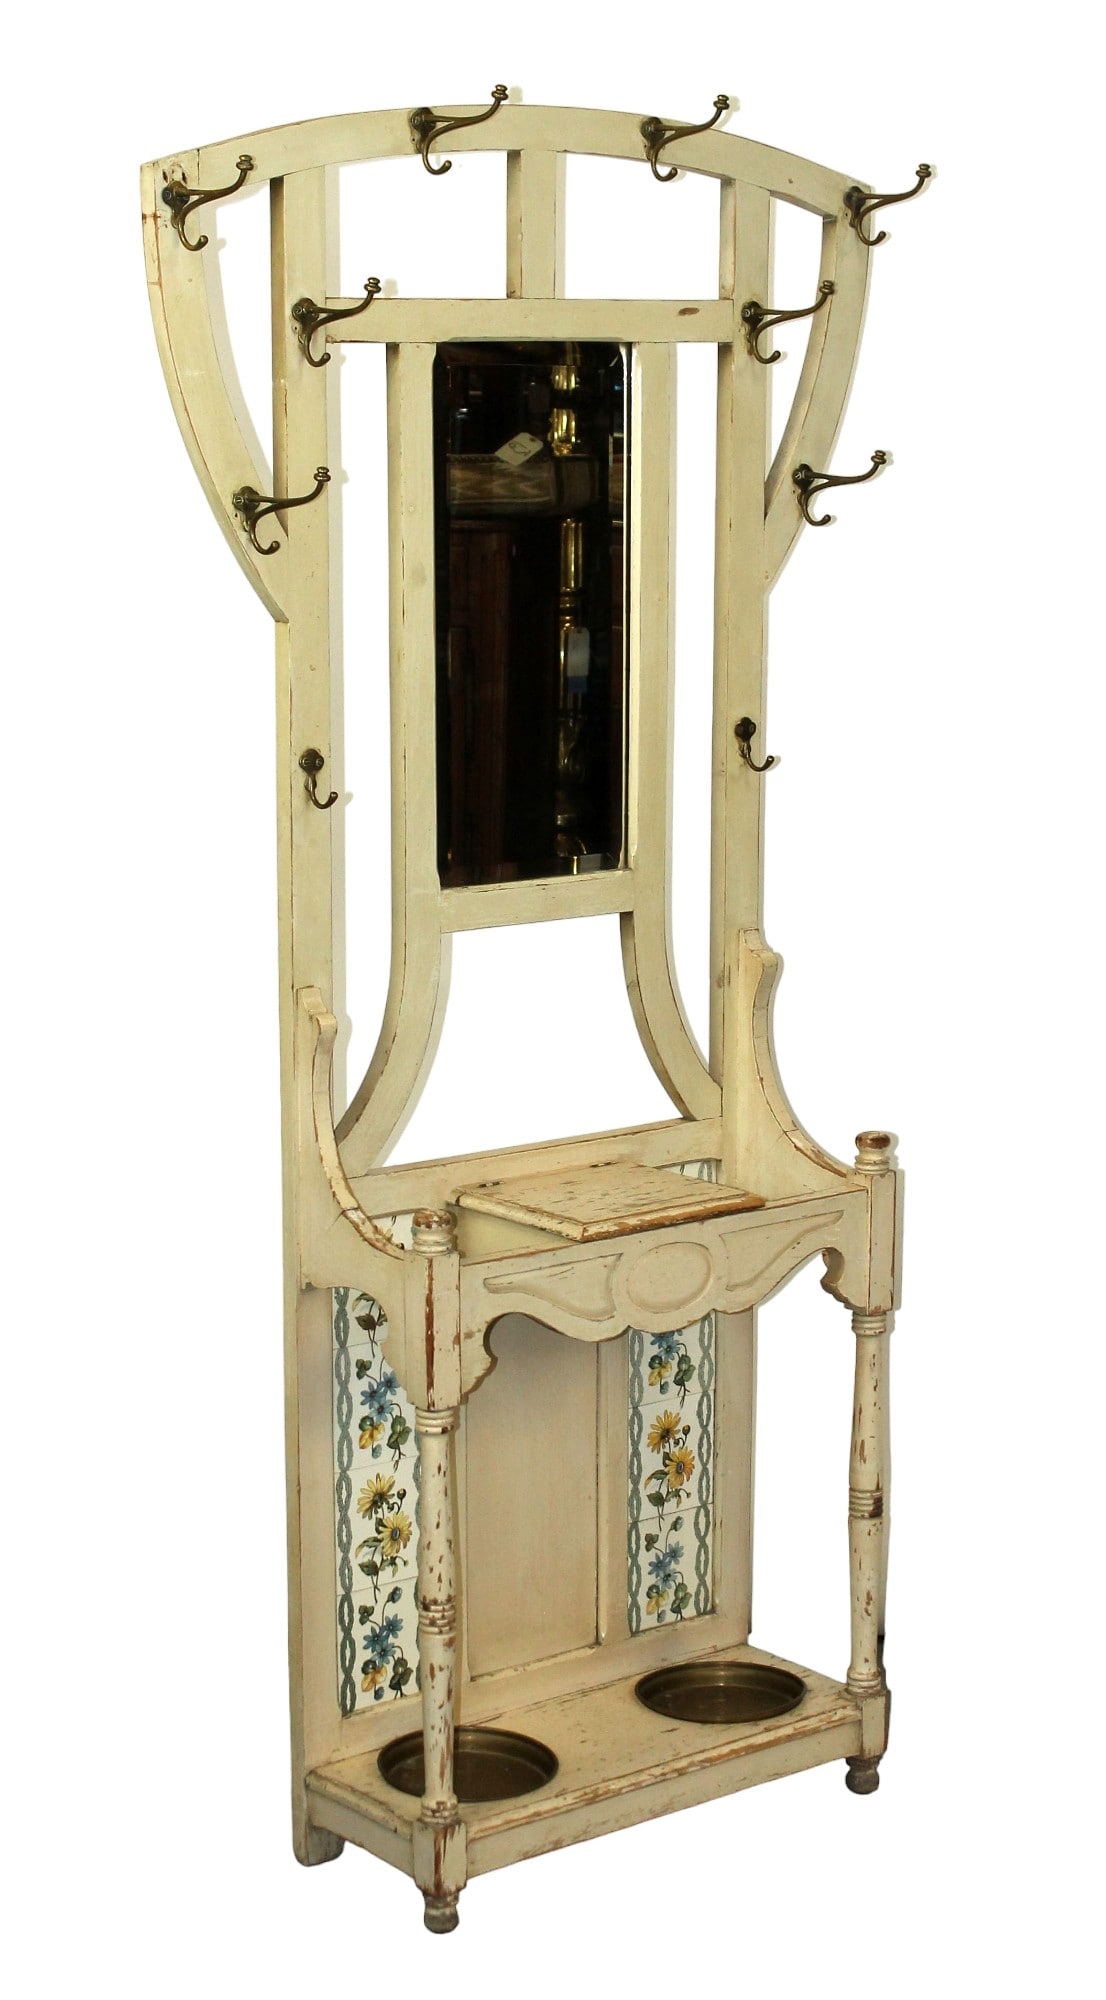 French Art Nouveau painted halltree